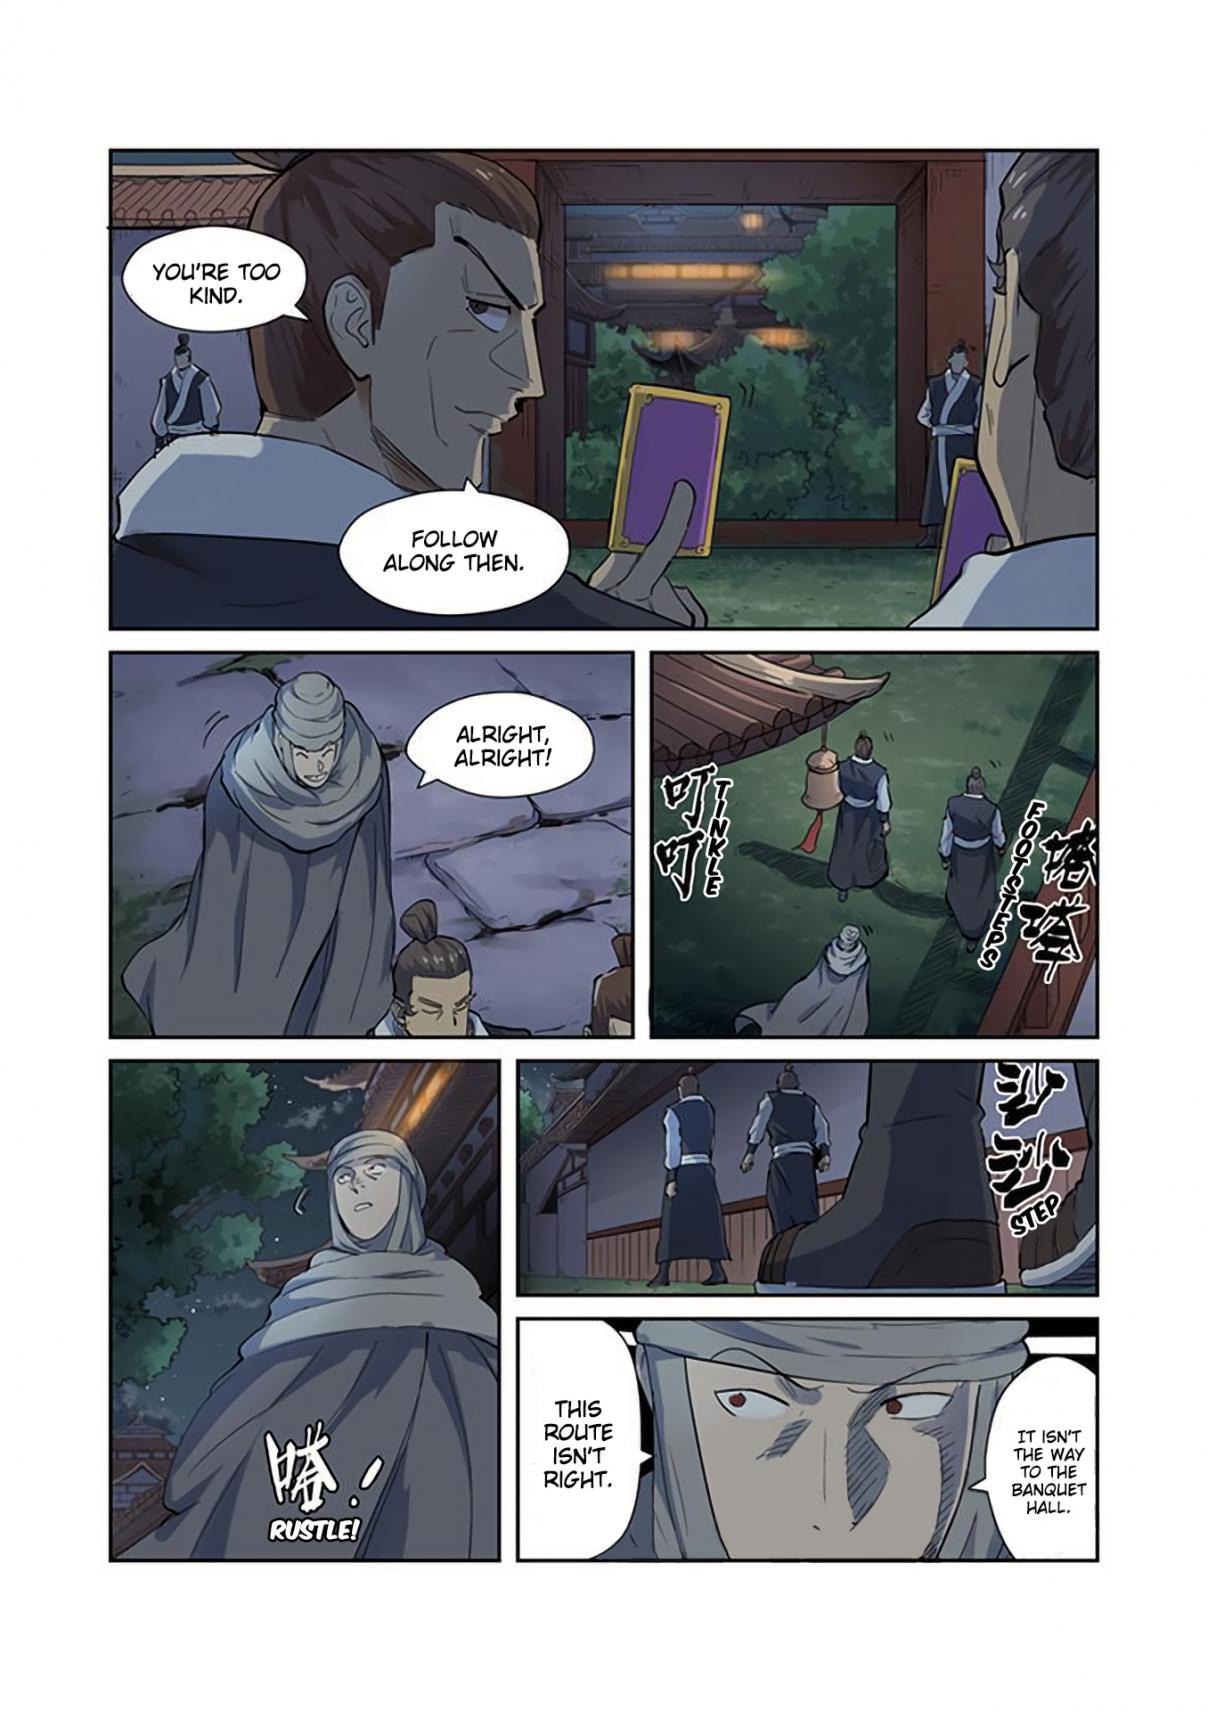 Tales of Demons and Gods Ch. 201.5 Shen Hong's Premonition (Part 2)